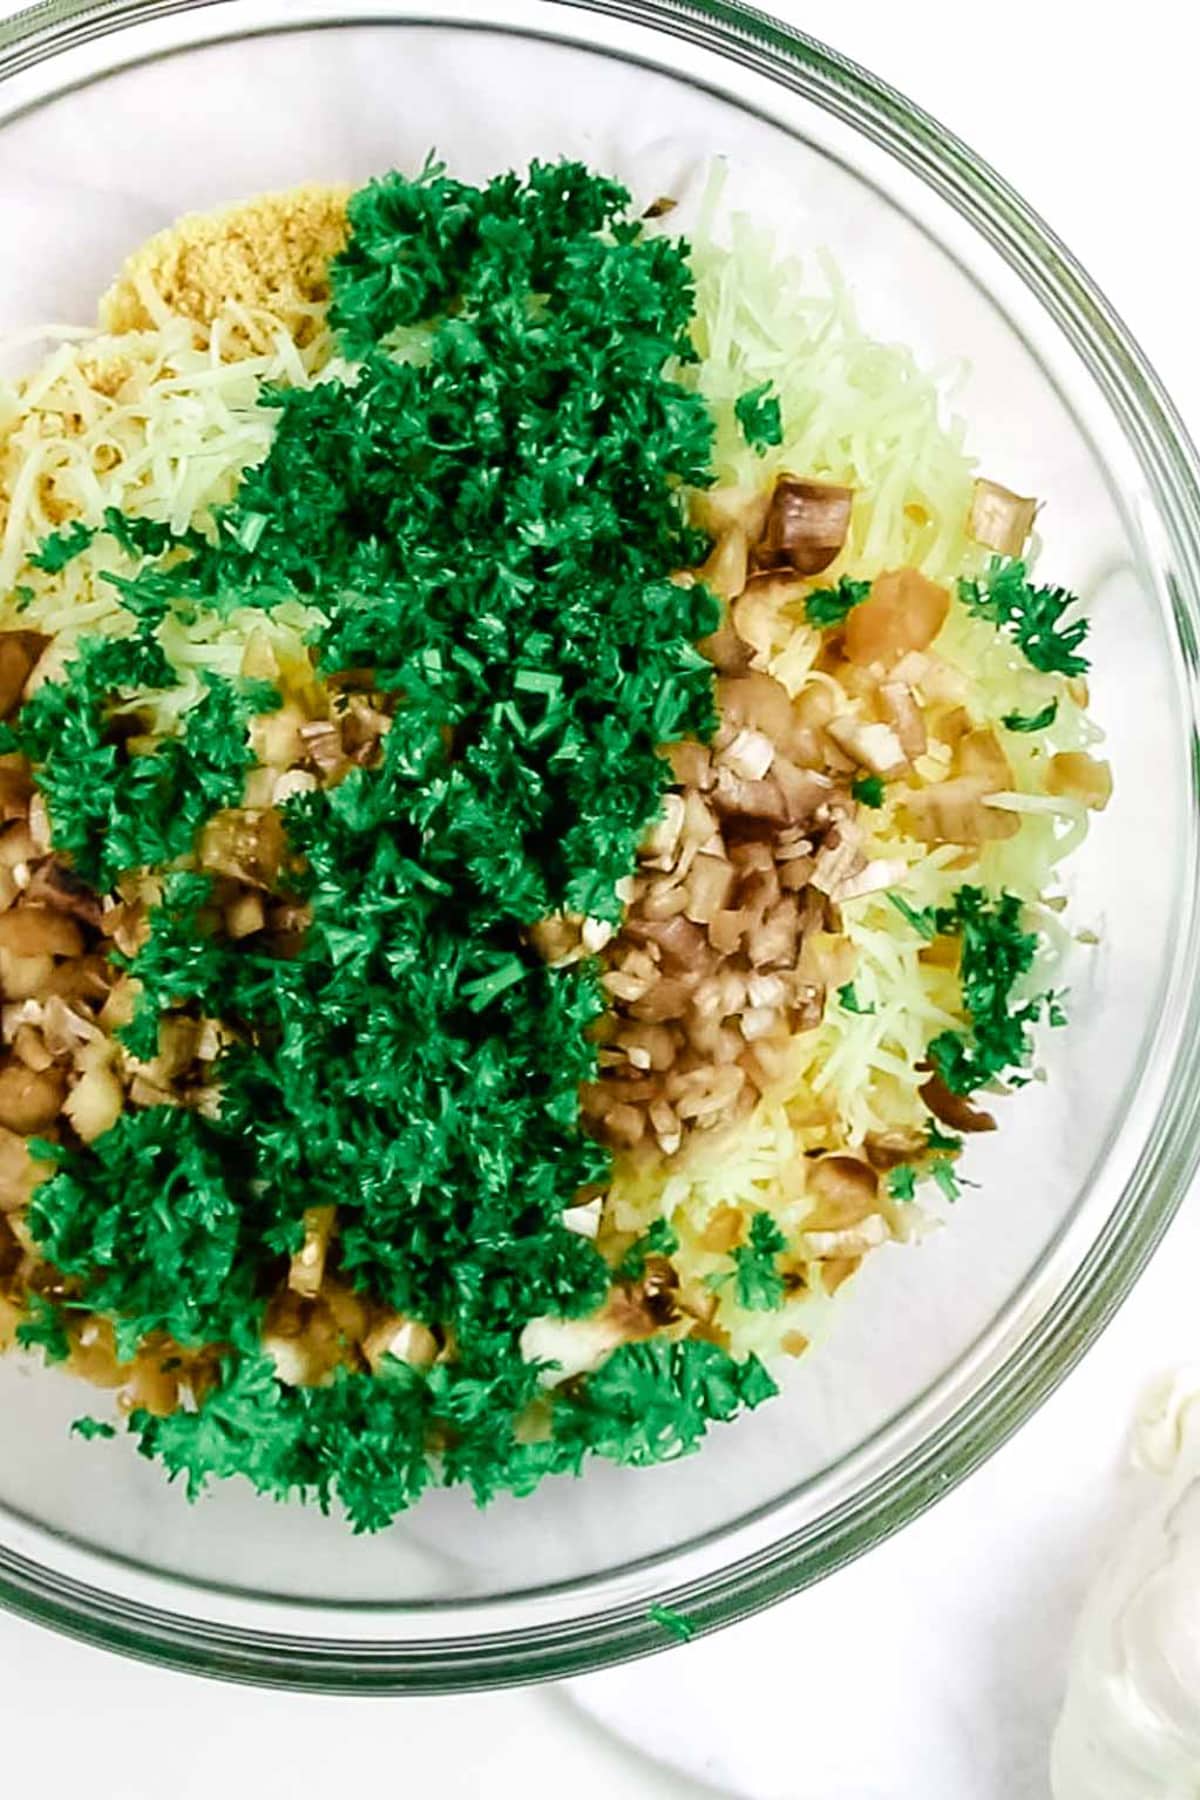 clear glass bowl that holds grated cheese, mushroom stems, and fresh parsley.